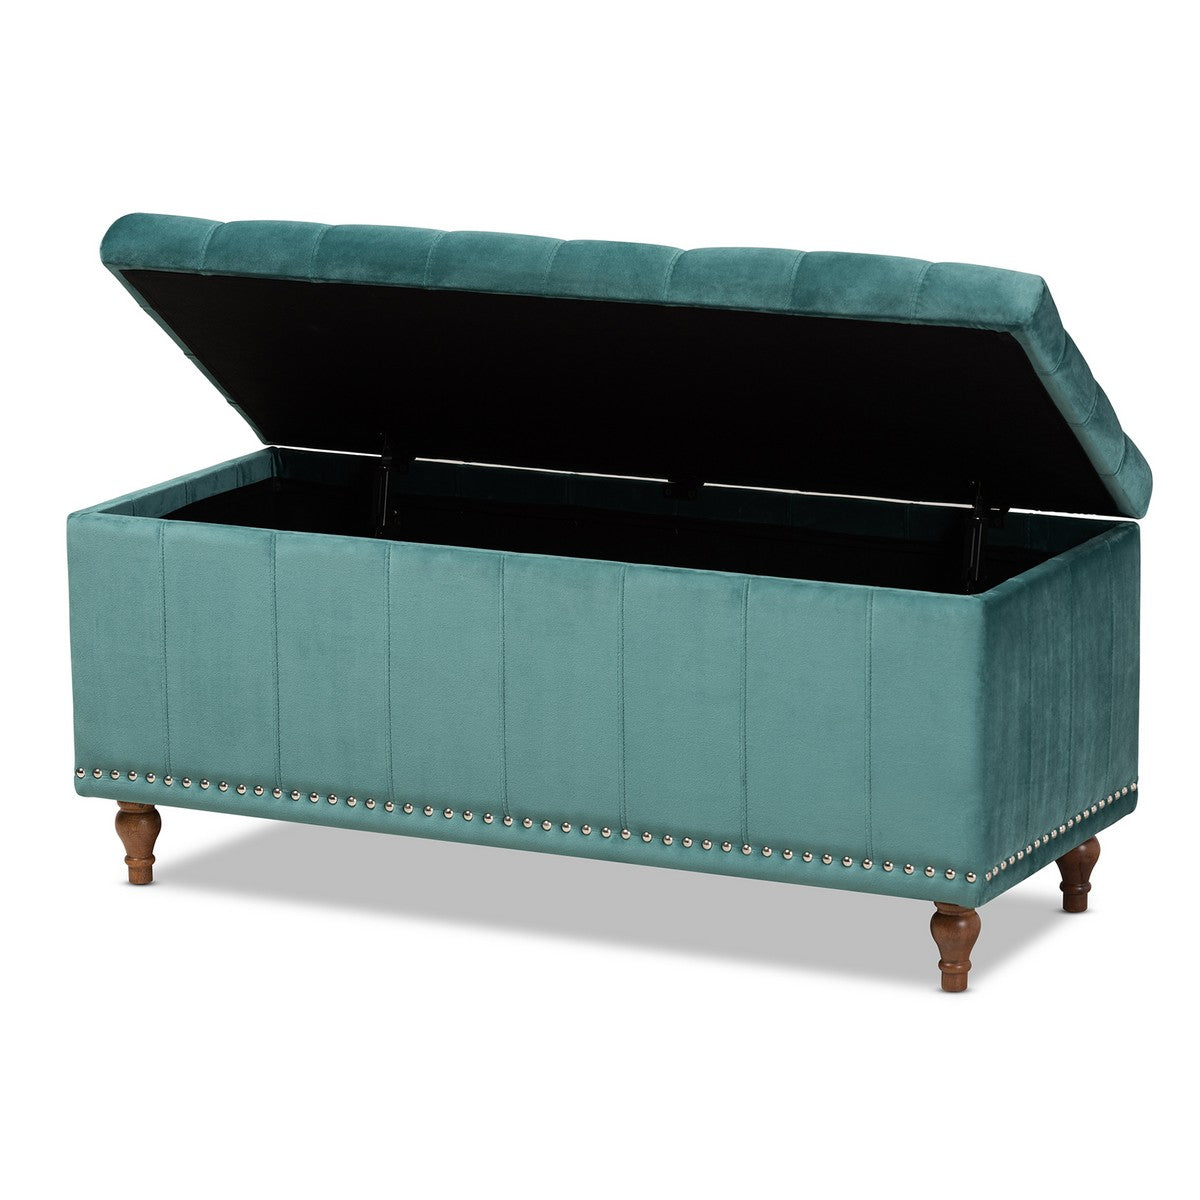 Baxton Studio Kaylee Modern and Contemporary Teal Blue Velvet Fabric Upholstered Button-Tufted Storage Ottoman Bench